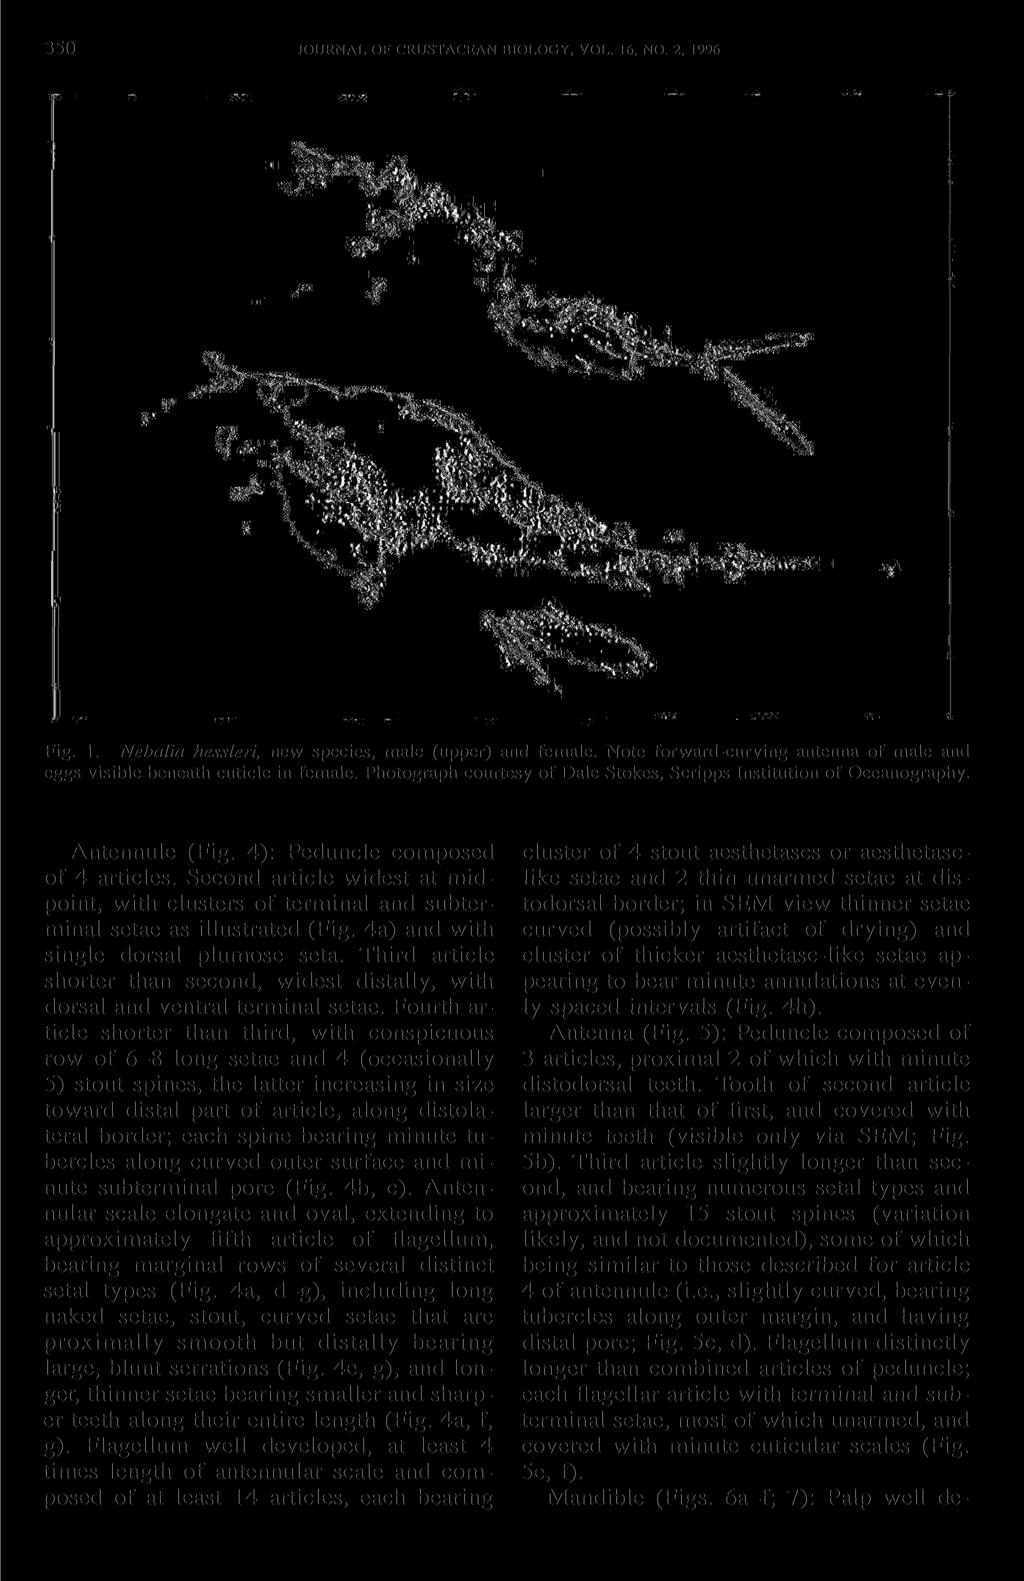 350 JOURNAL OF CRUSTACEAN BIOLOGY, VOL. 16, NO. 2, 1996 Fig. 1. Nebalia hessleri, new species, male (upper) and female. Note forward-curving antenna of male and eggs visible beneath cuticle in female.